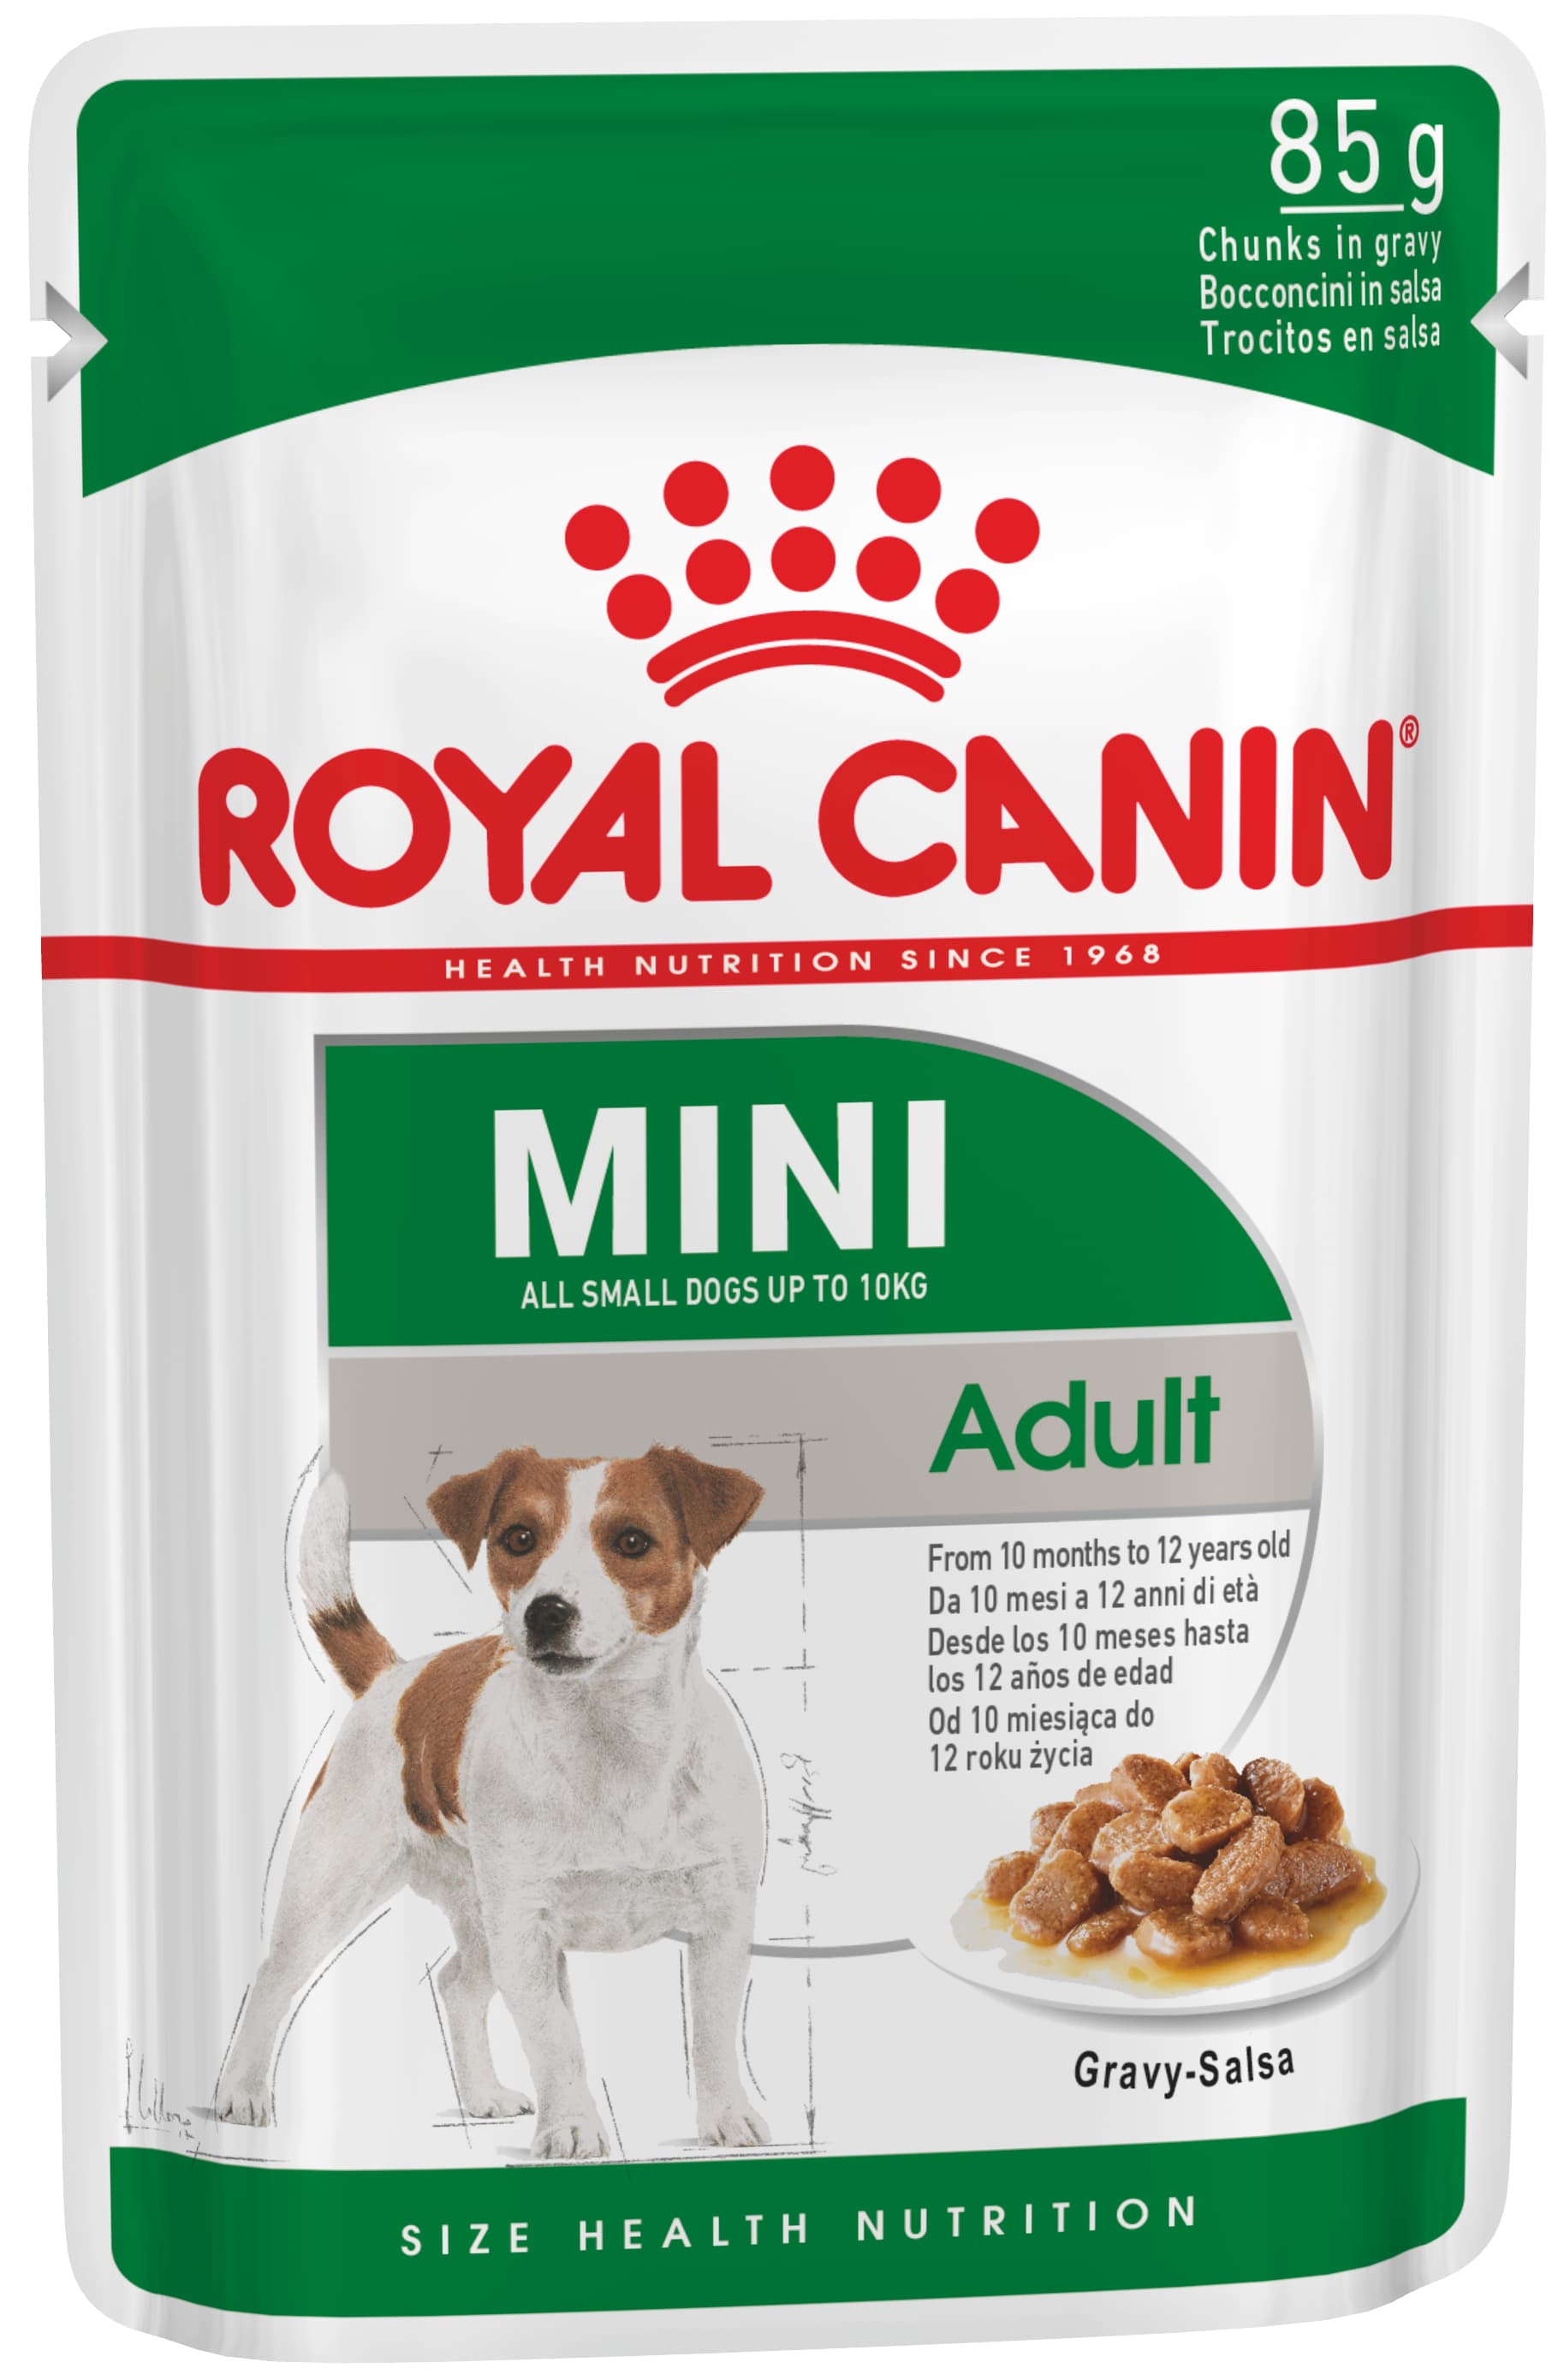 Royal Canin Mini Adult Pouch 